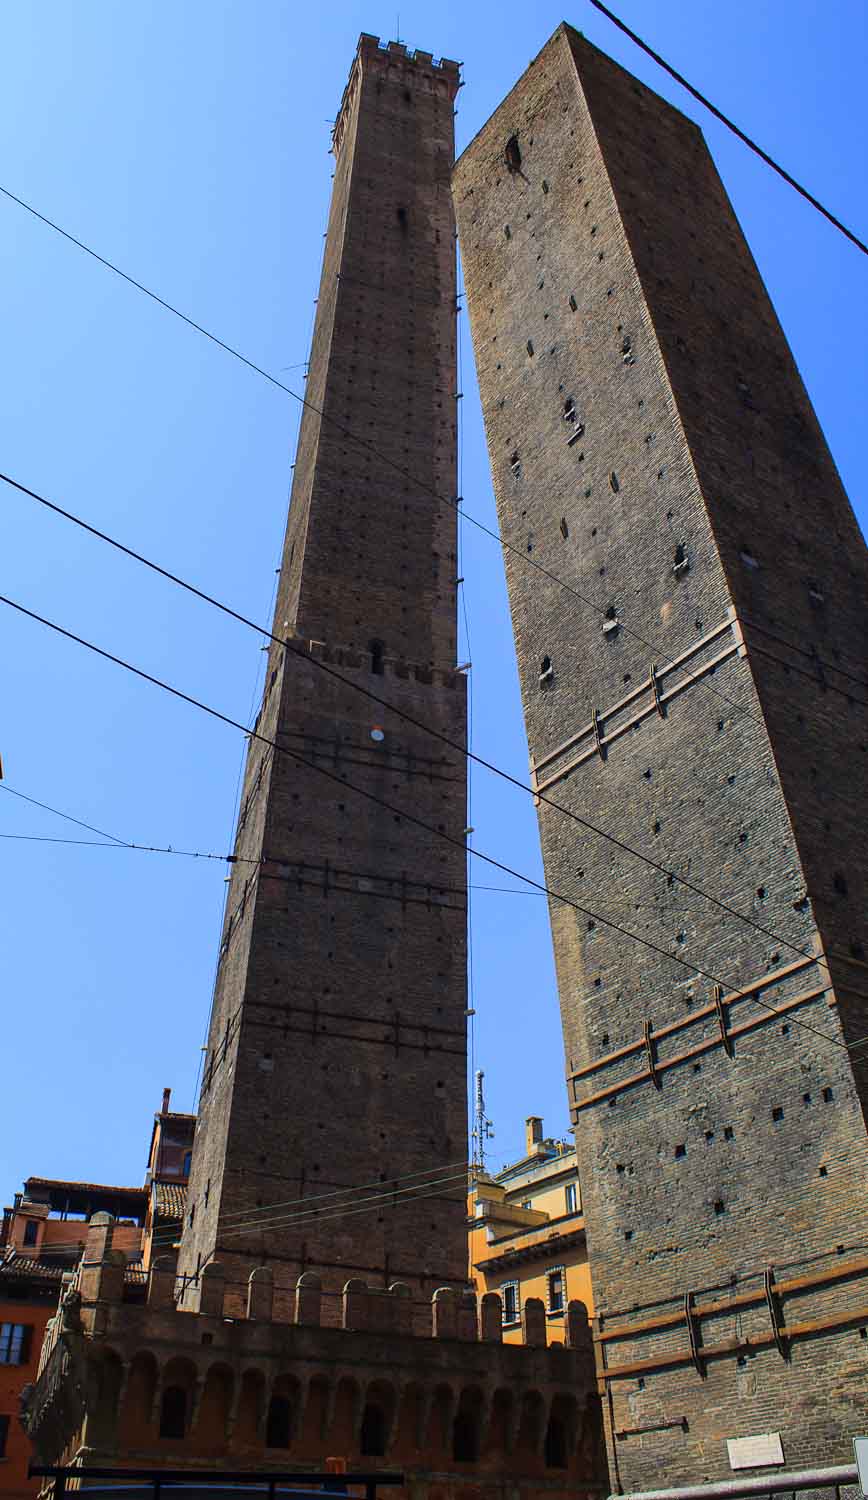 Two Leaning Towers of Bologna